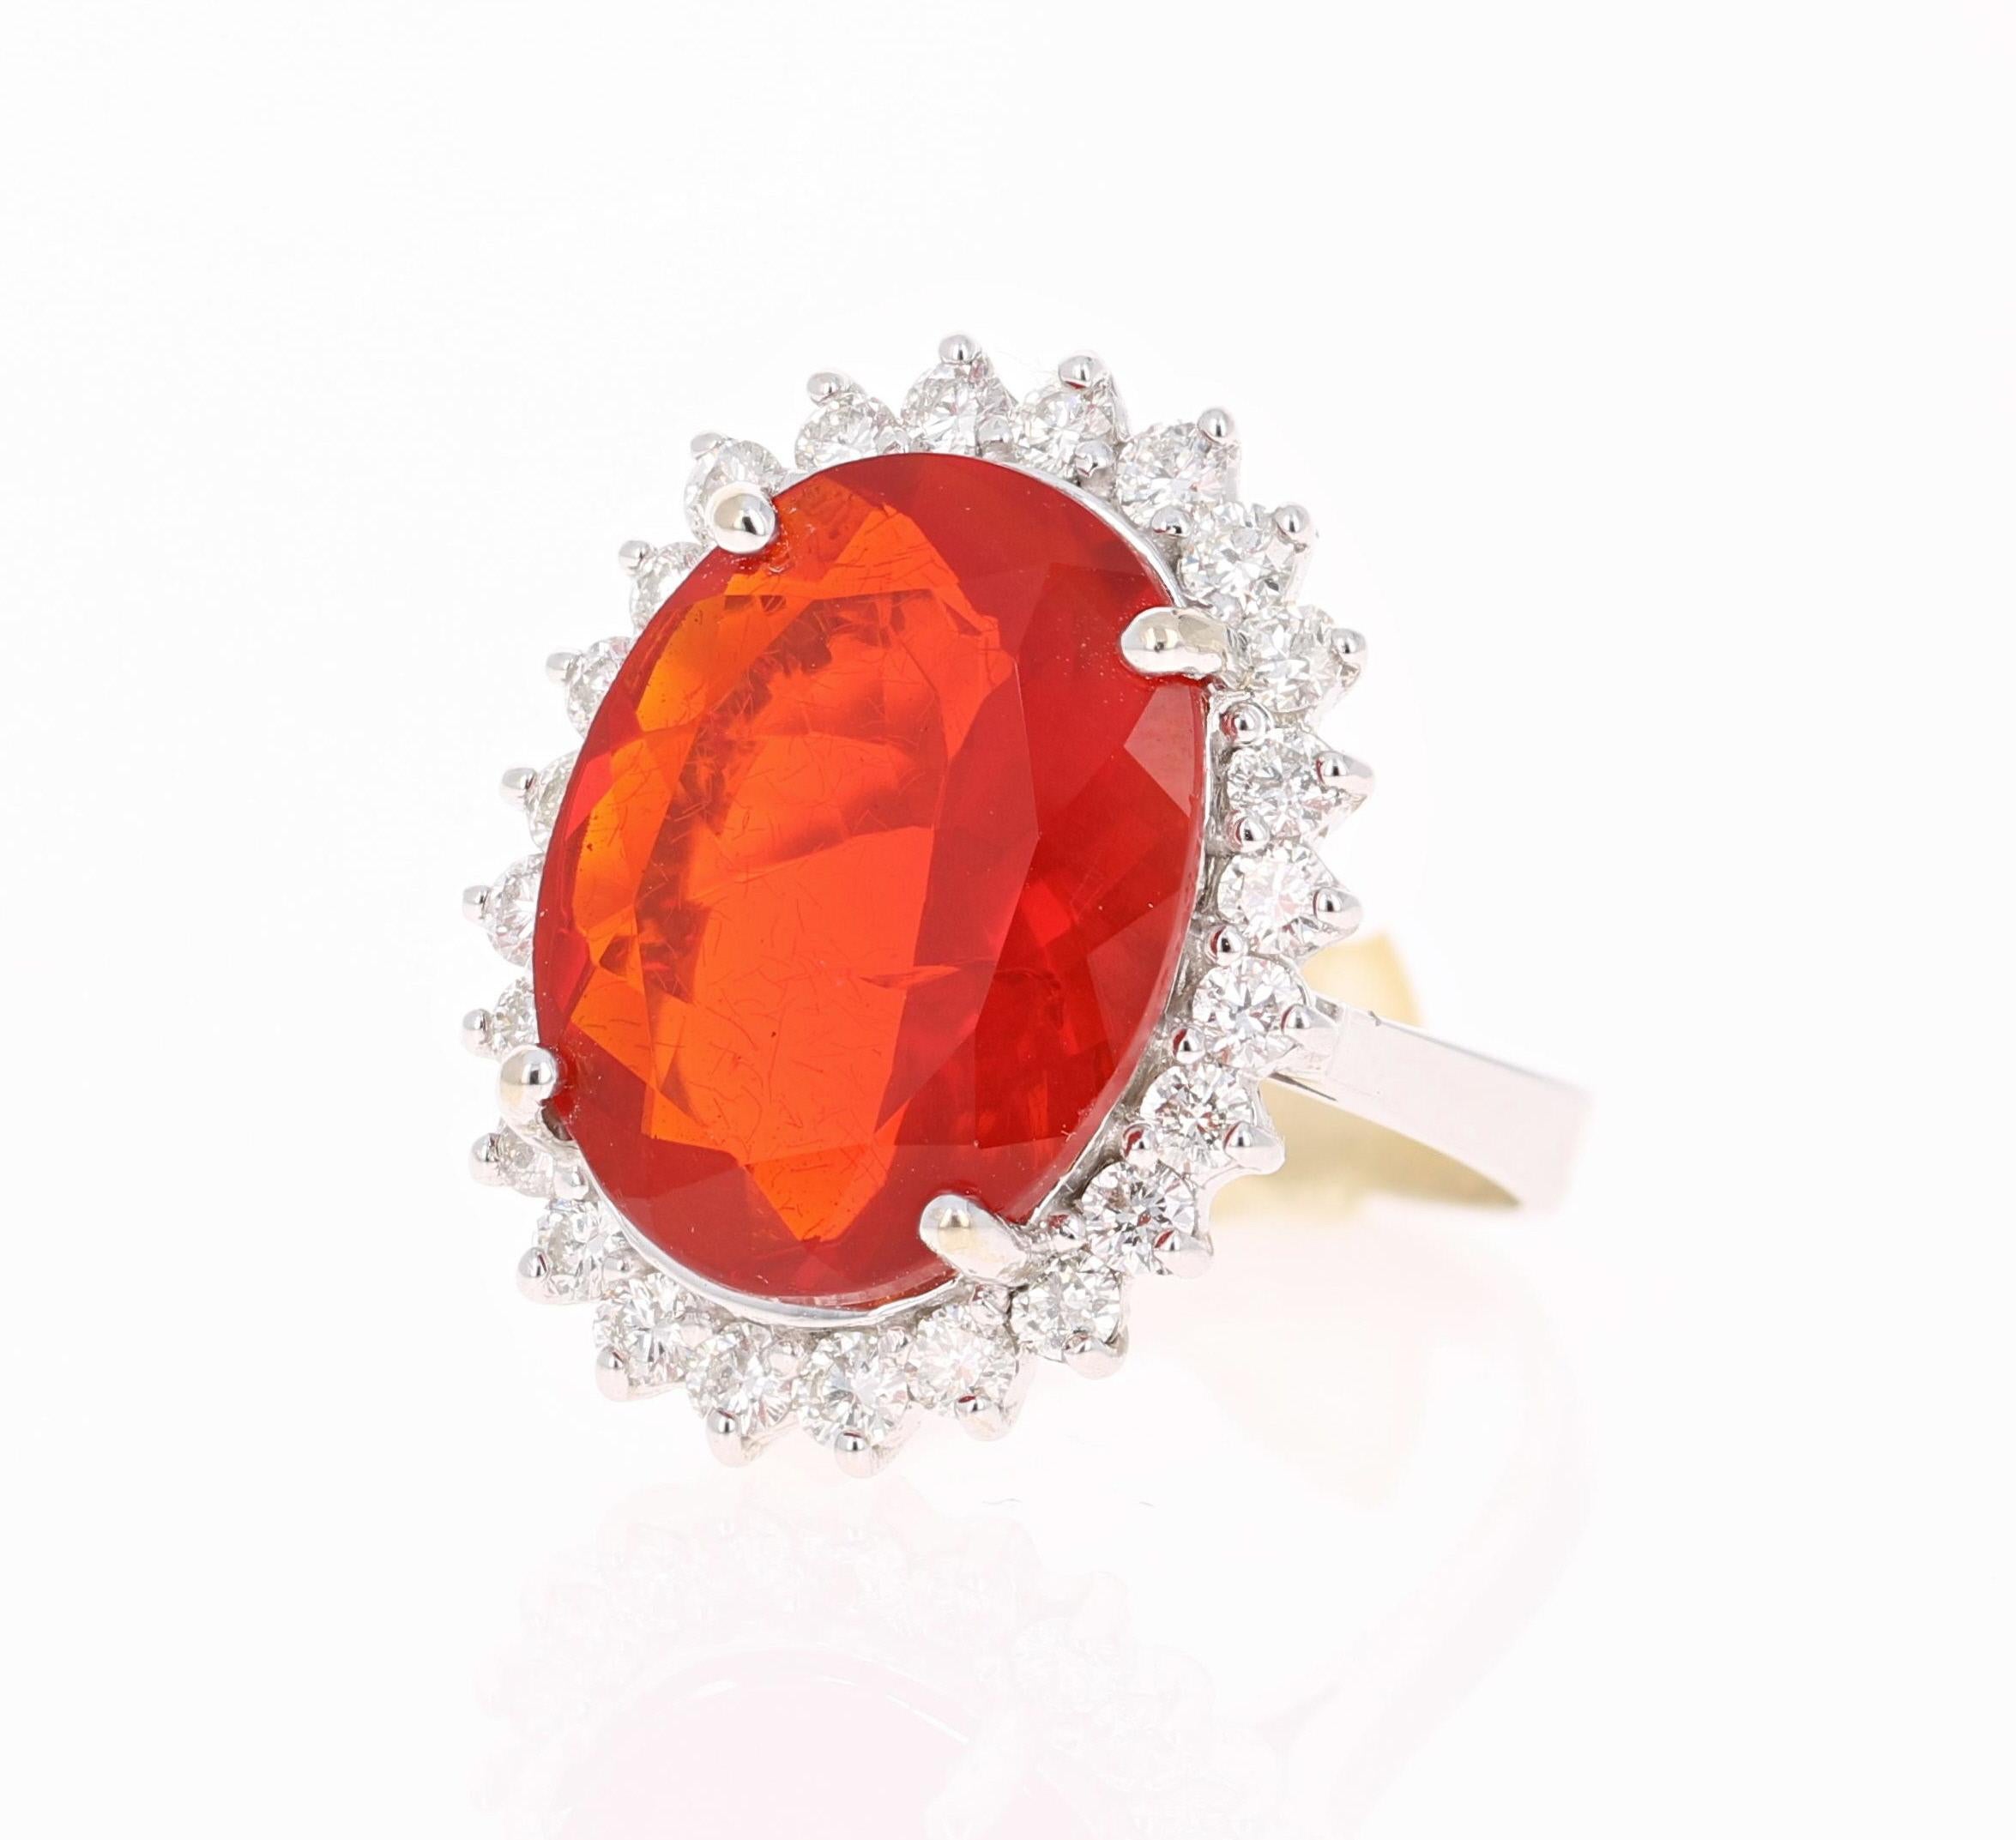 Beautiful Fire Opal and Diamond Ring. This ring has an Oval Cut Fire Opal that weighs 6.81 carats in the center of the ring and is surrounded by a halo of 24 Round Cut Diamonds that weigh 0.96 carats (Clarity: VS2, Color: H).  The total carat weight